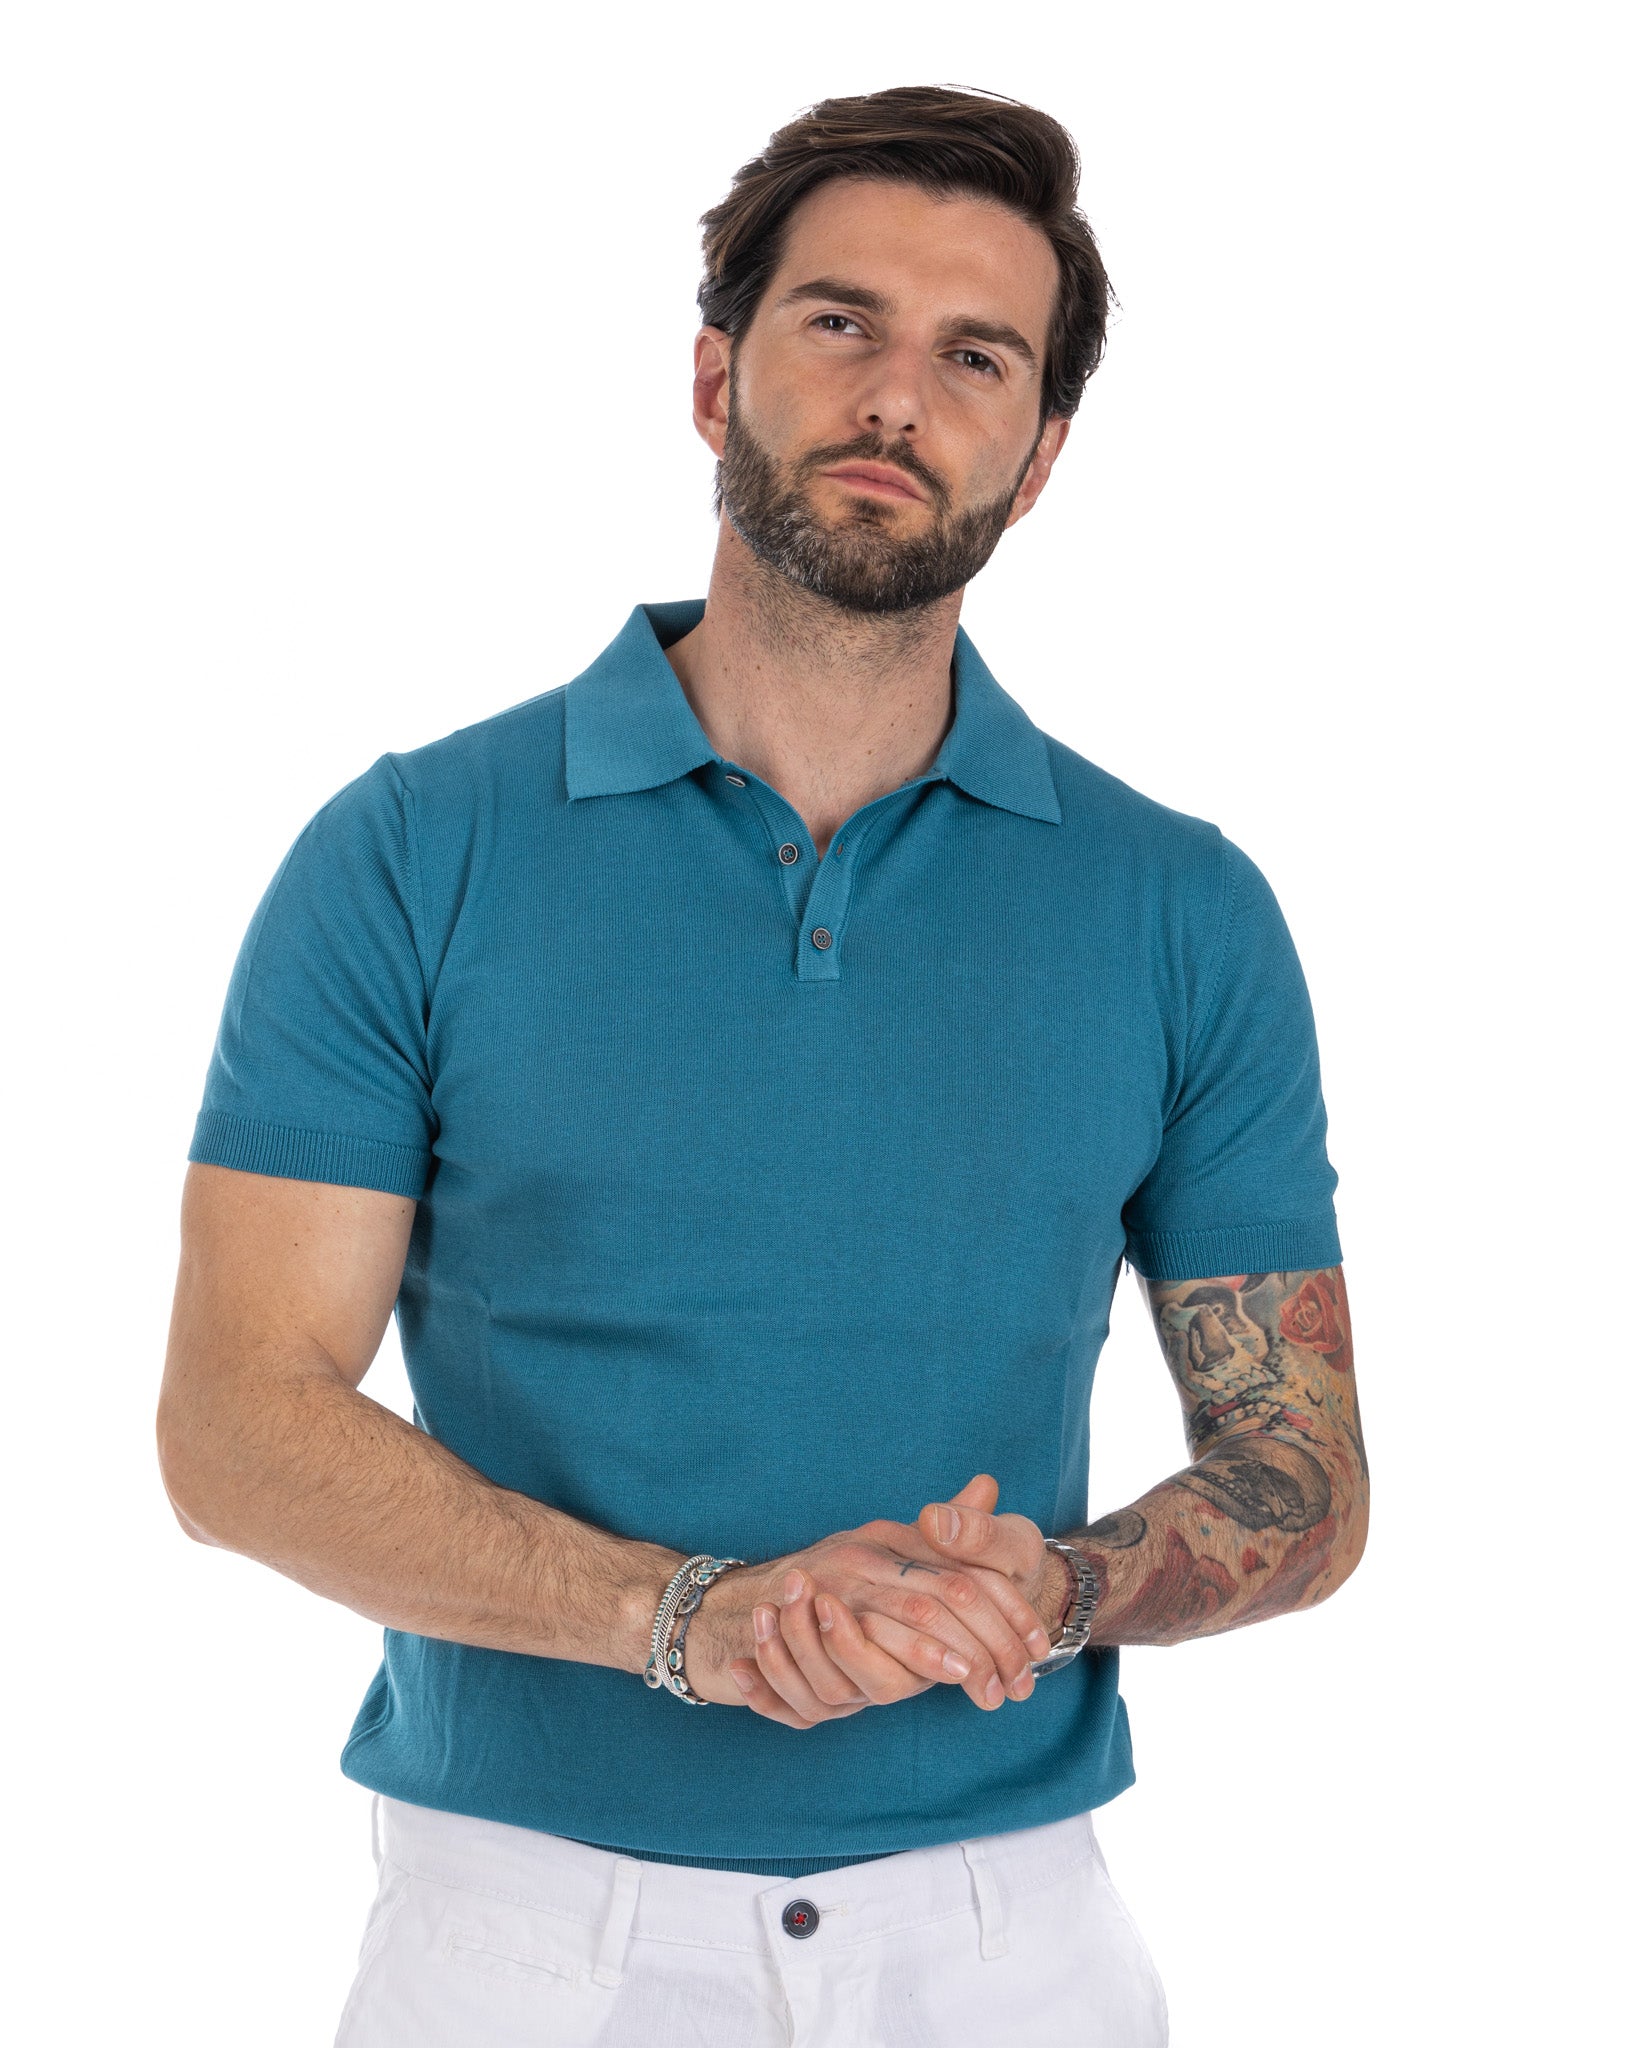 Roger - teal knitted polo